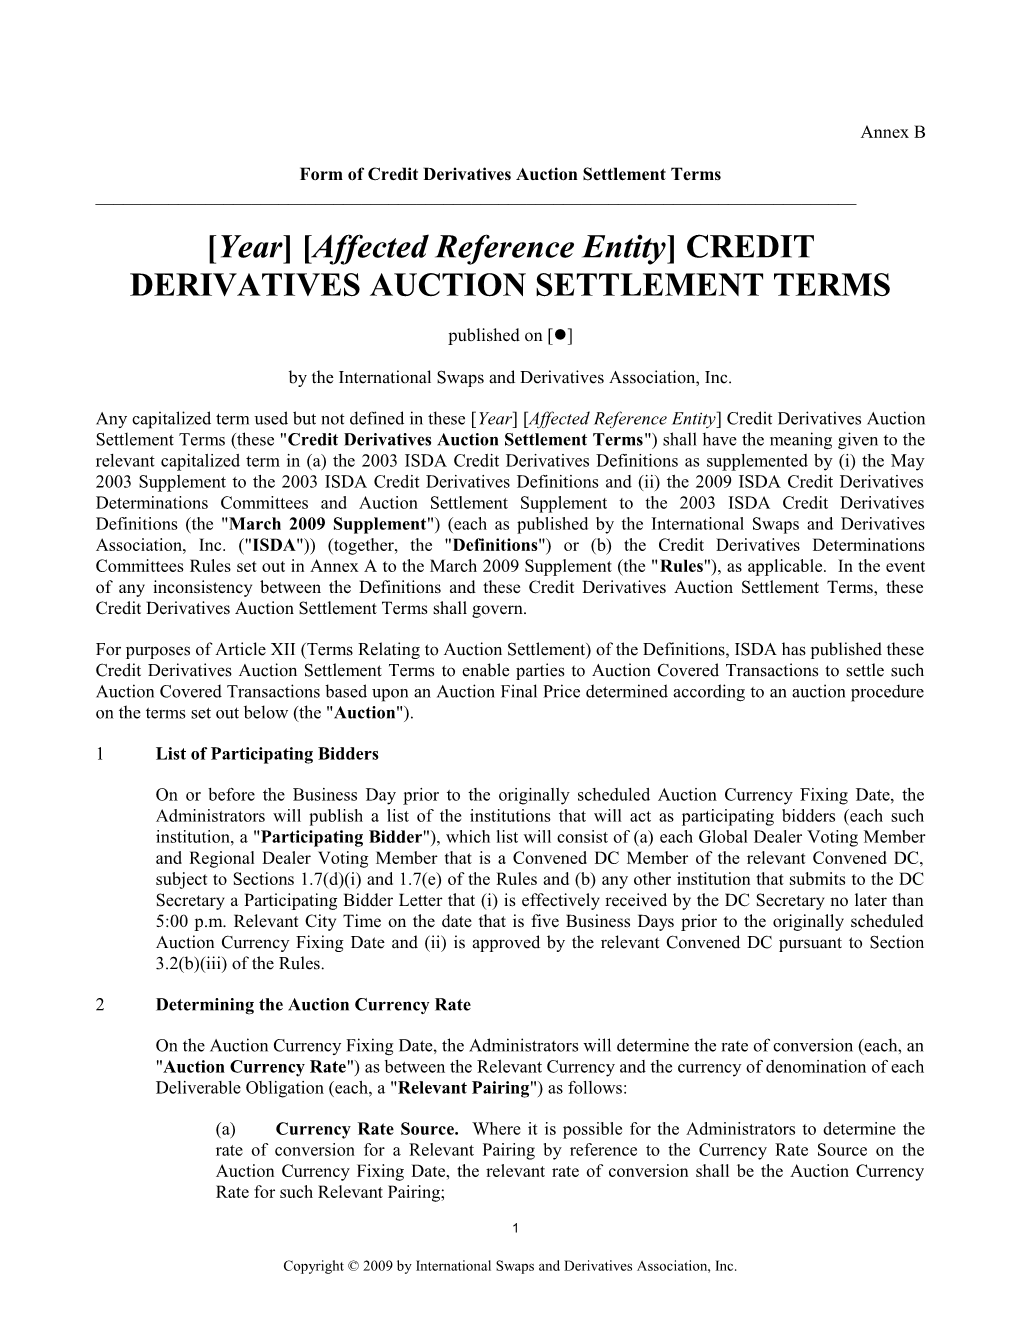 Form of Credit Derivatives Auction Settlement Terms